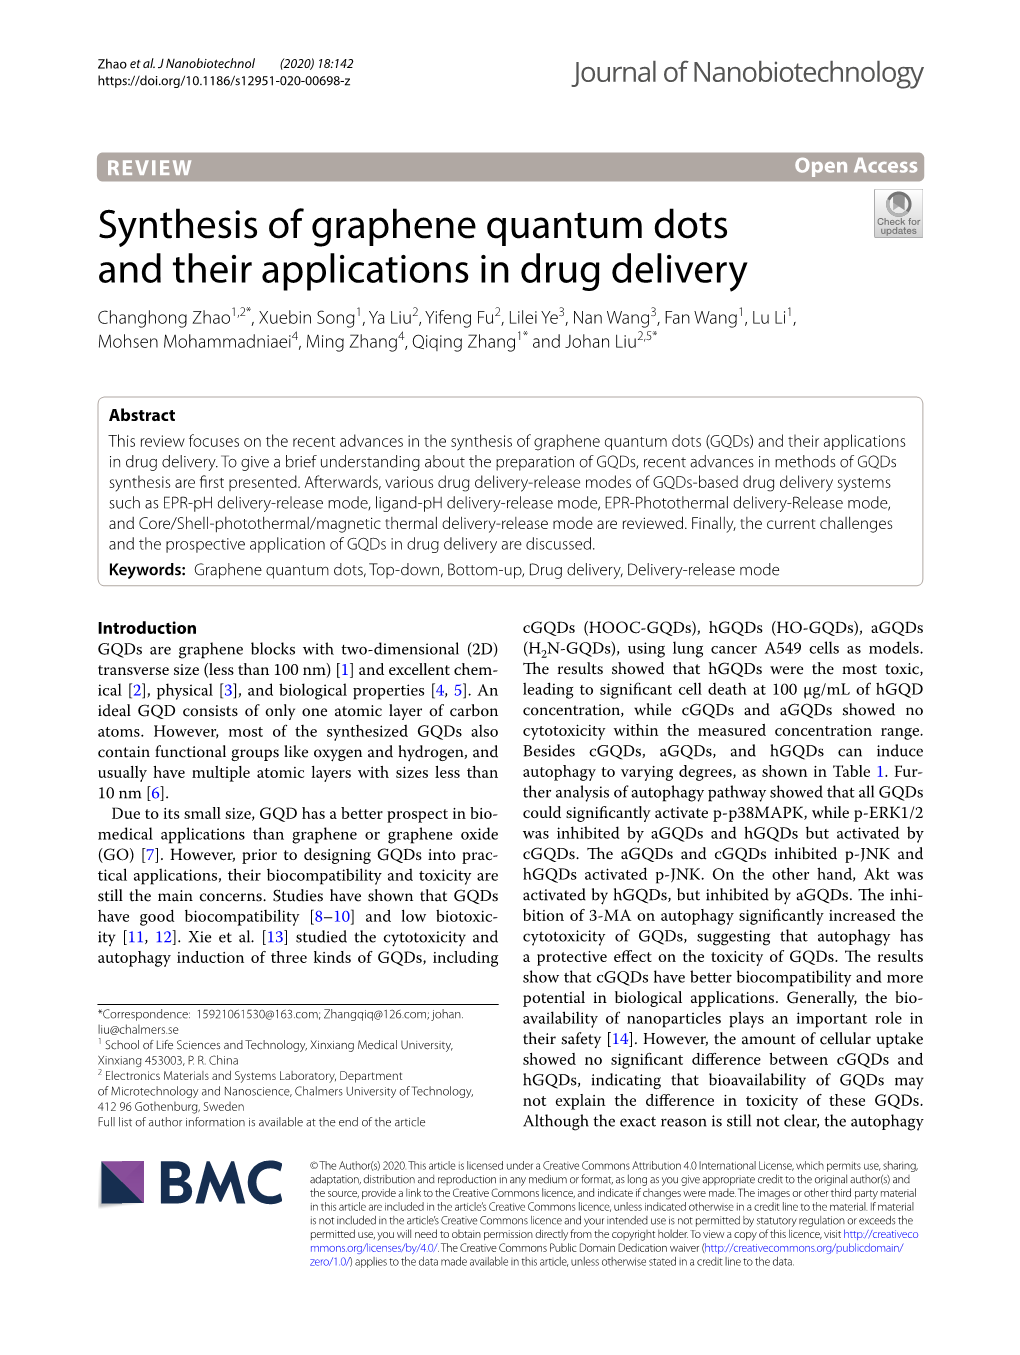 Synthesis of Graphene Quantum Dots and Their Applications in Drug Delivery